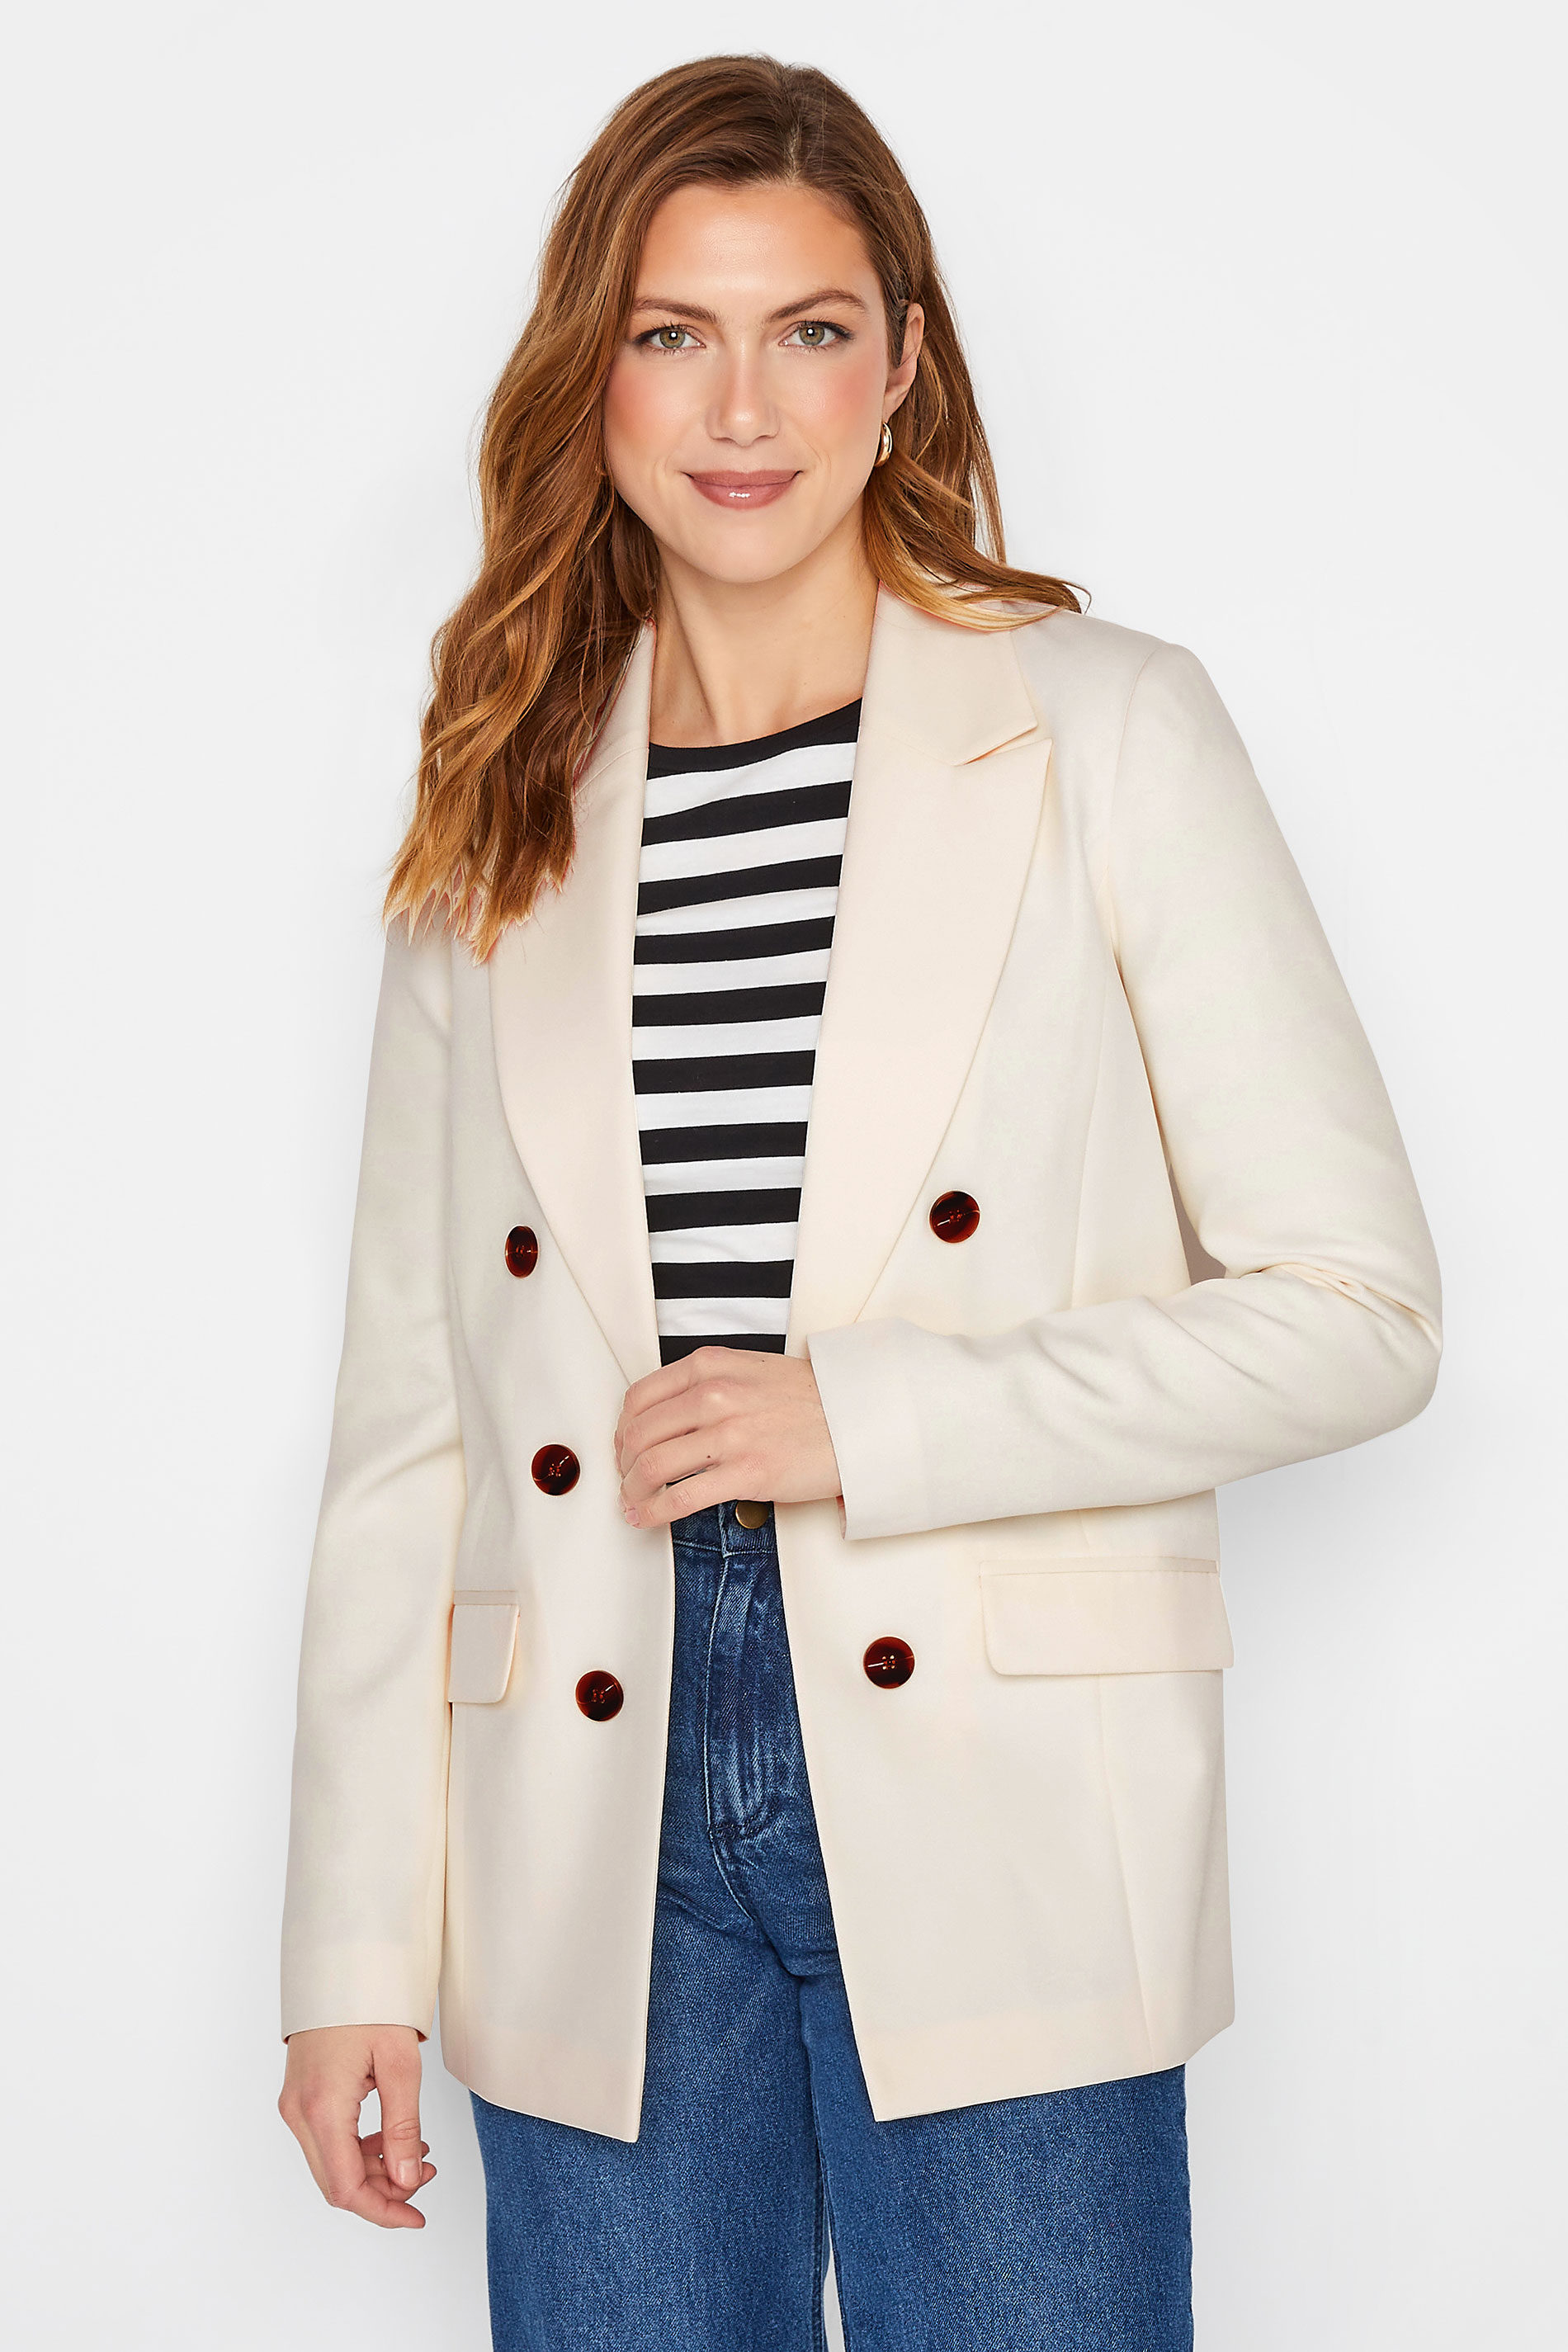 LTS Tall Women's Ivory White Double Breasted Blazer | Long Tall Sally 1